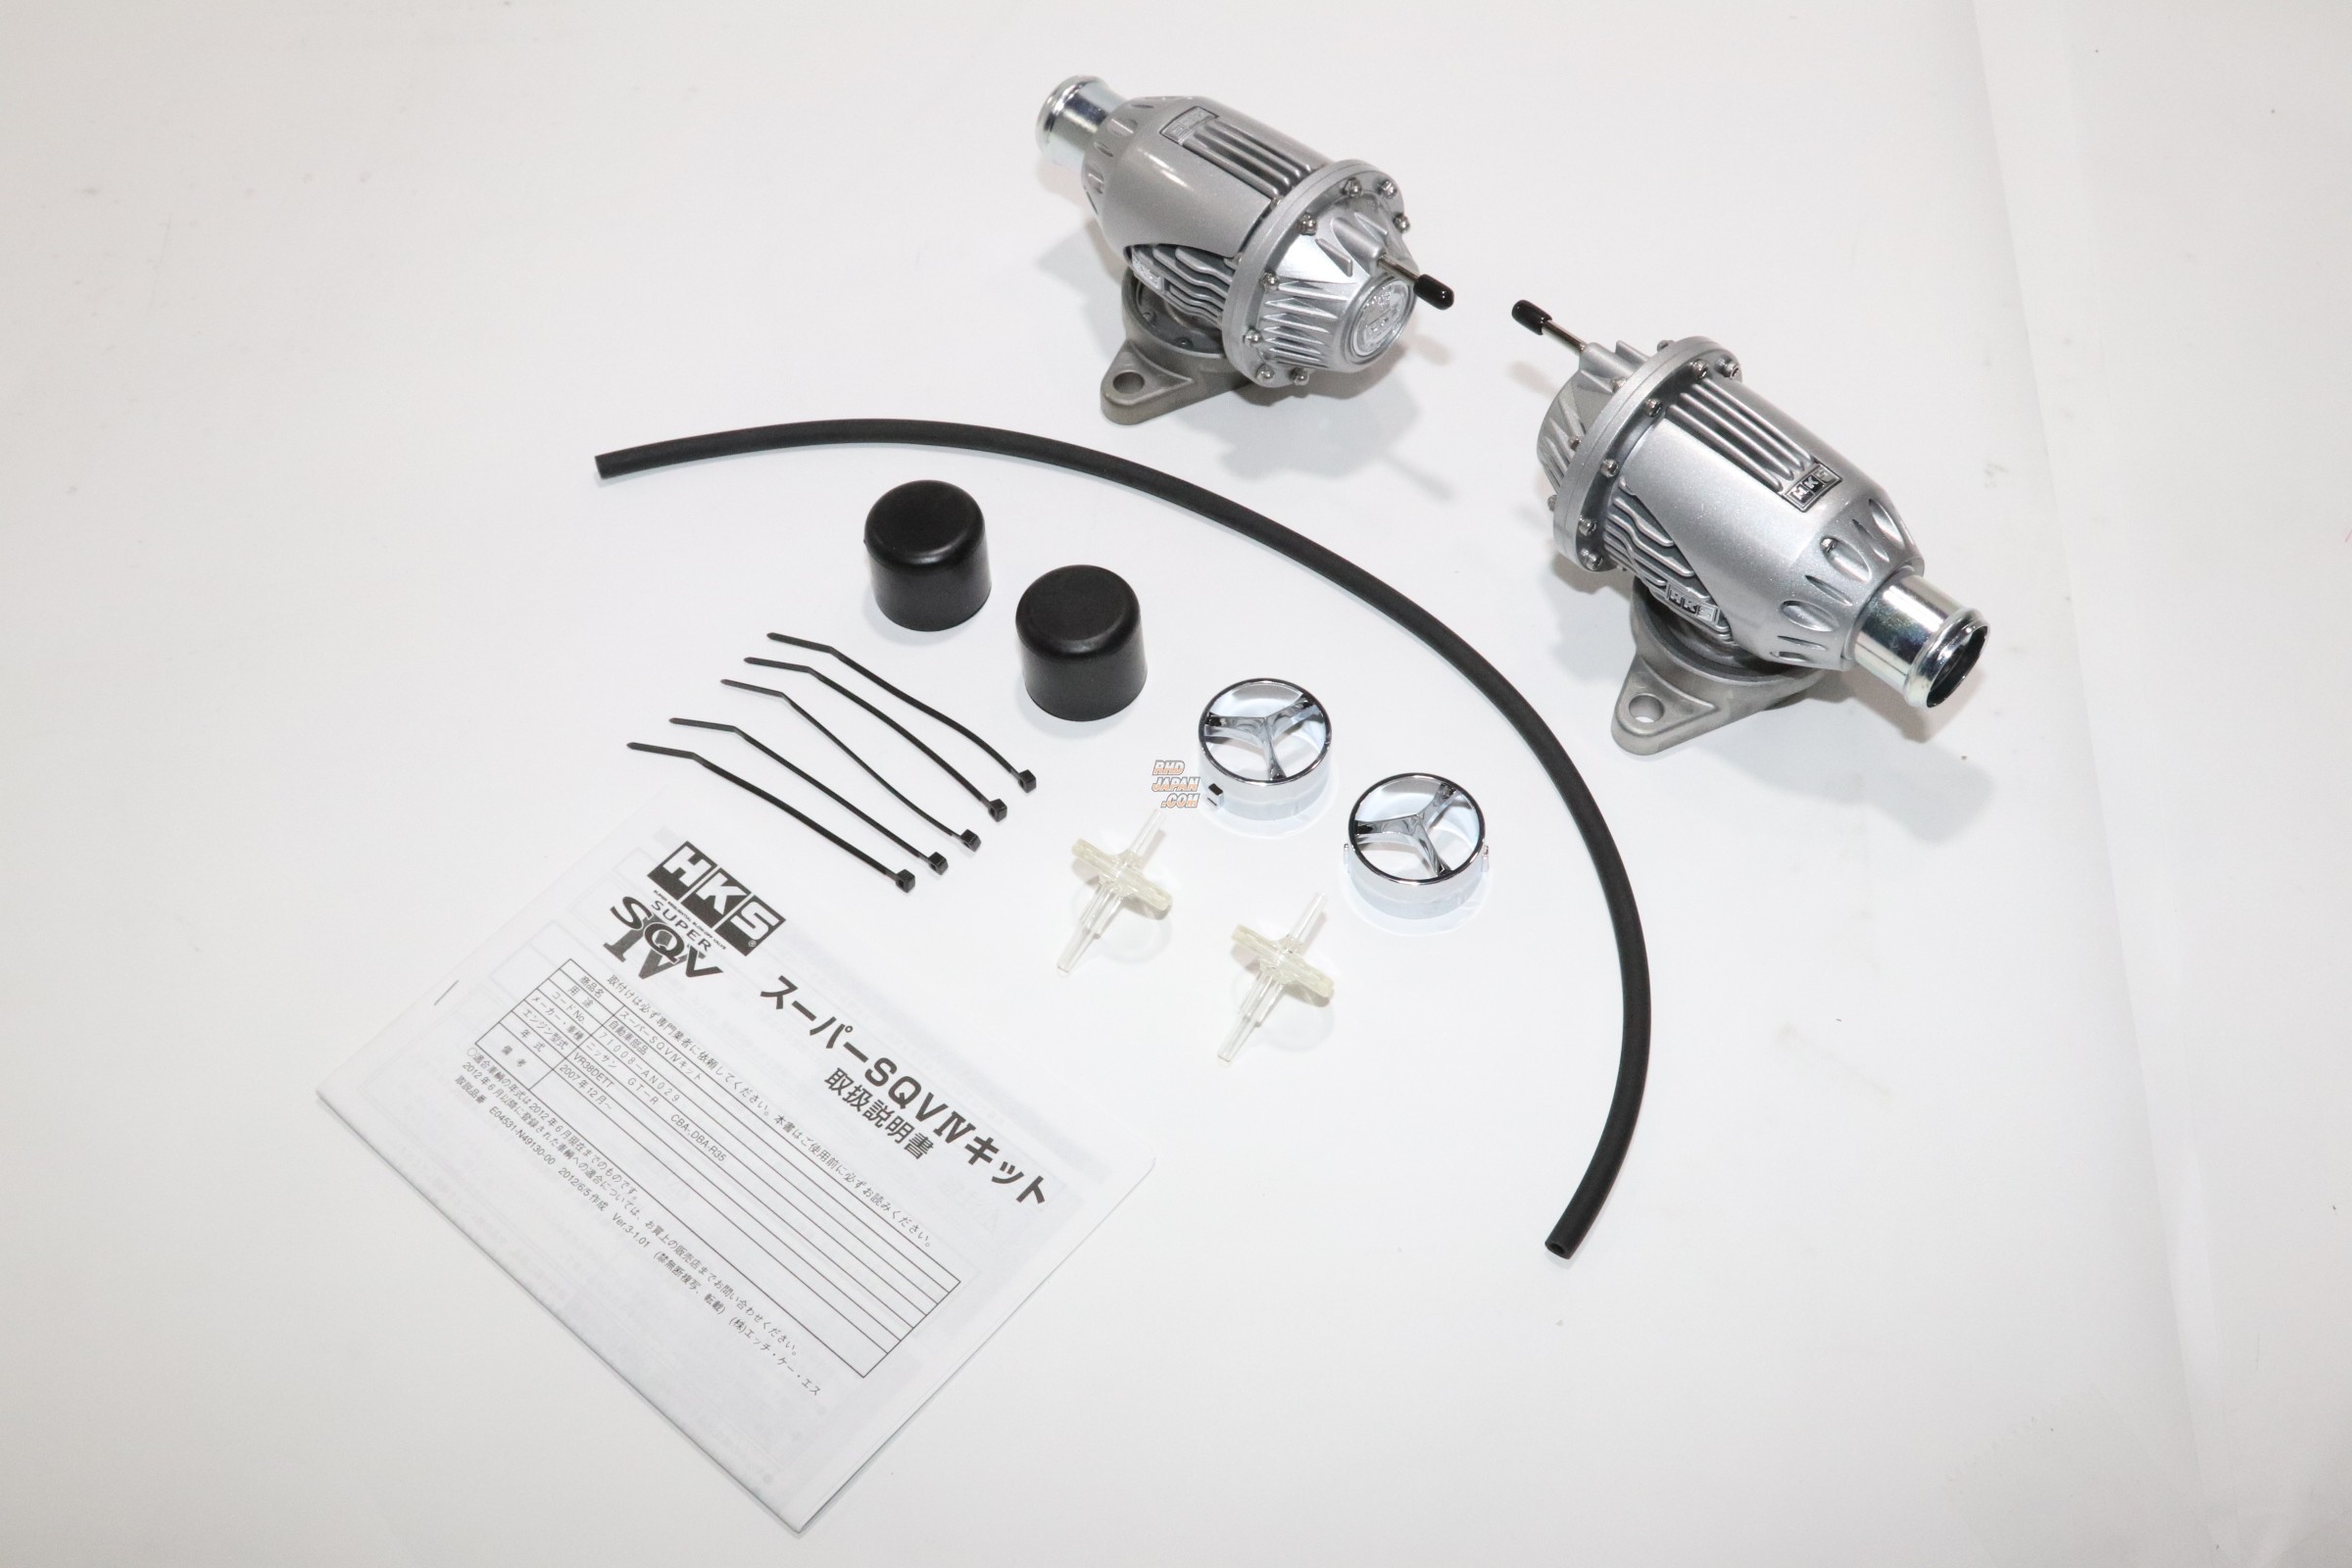 HKS Super SQV IV Sequential Blow Off Valve Kit OEM Bypass Valve Replacement  Type R35 RHDJapan